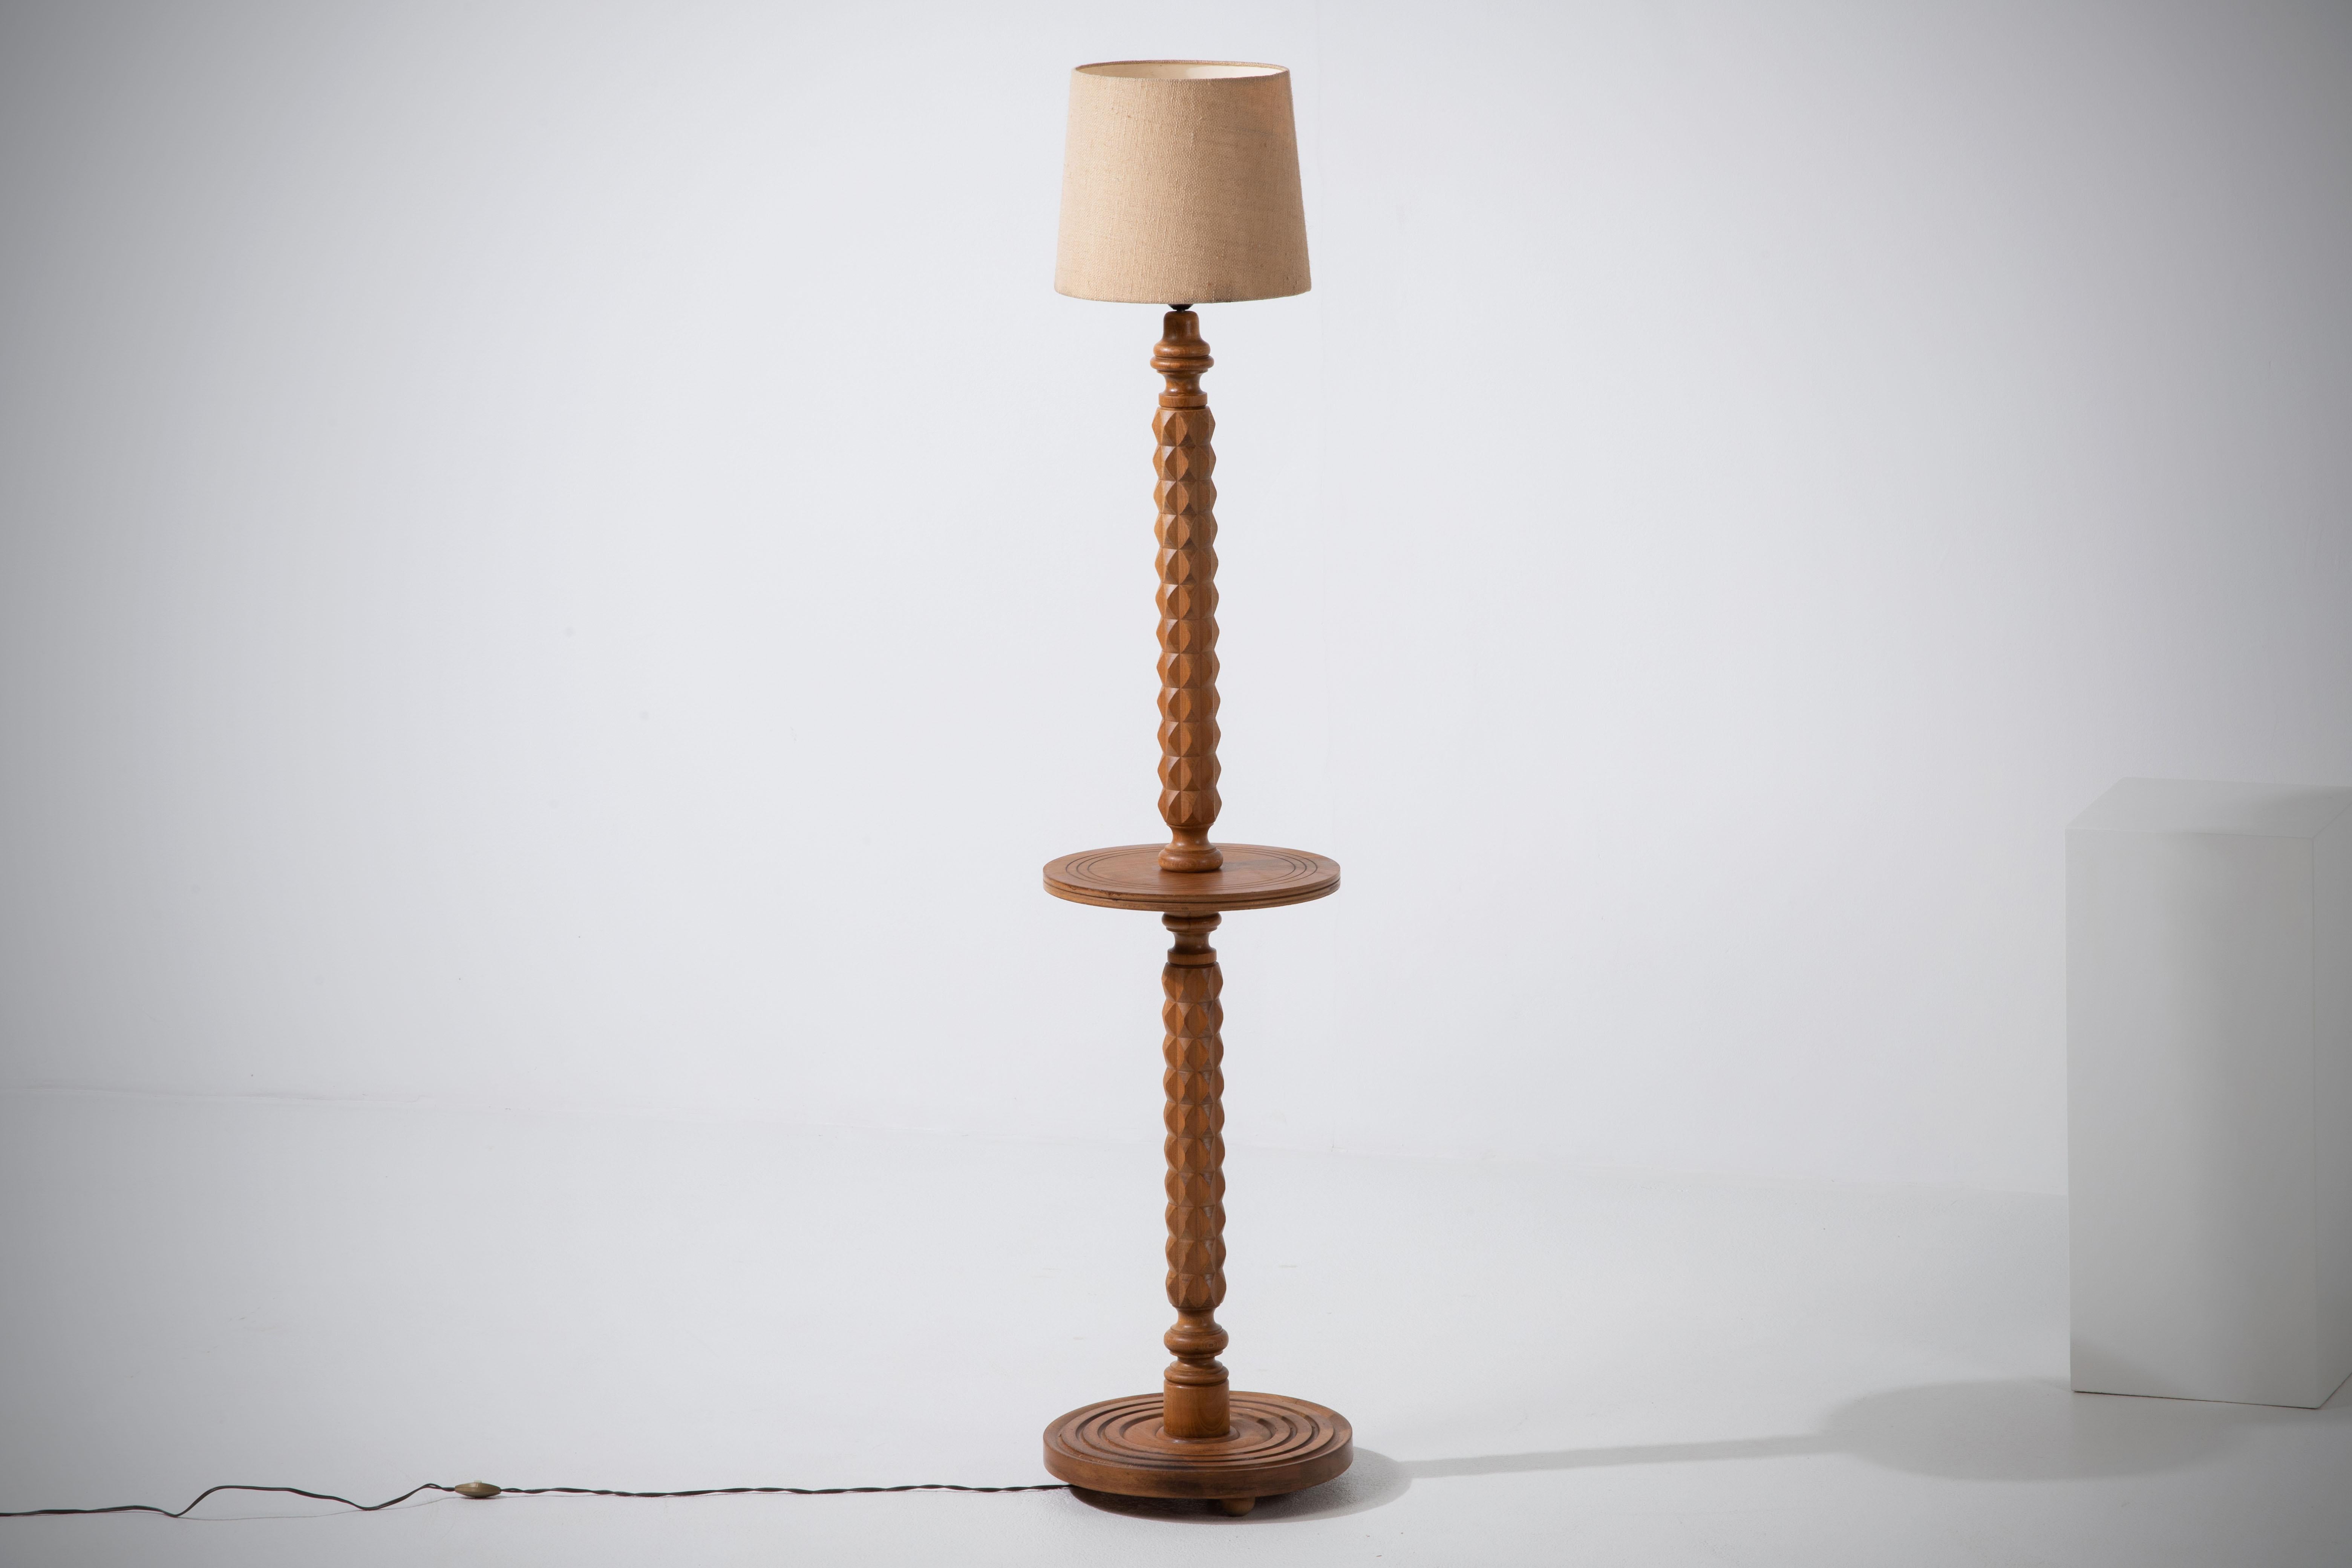 Twisted Oak Floor Lamp with Rope Lampshade, France, 1940 For Sale 7